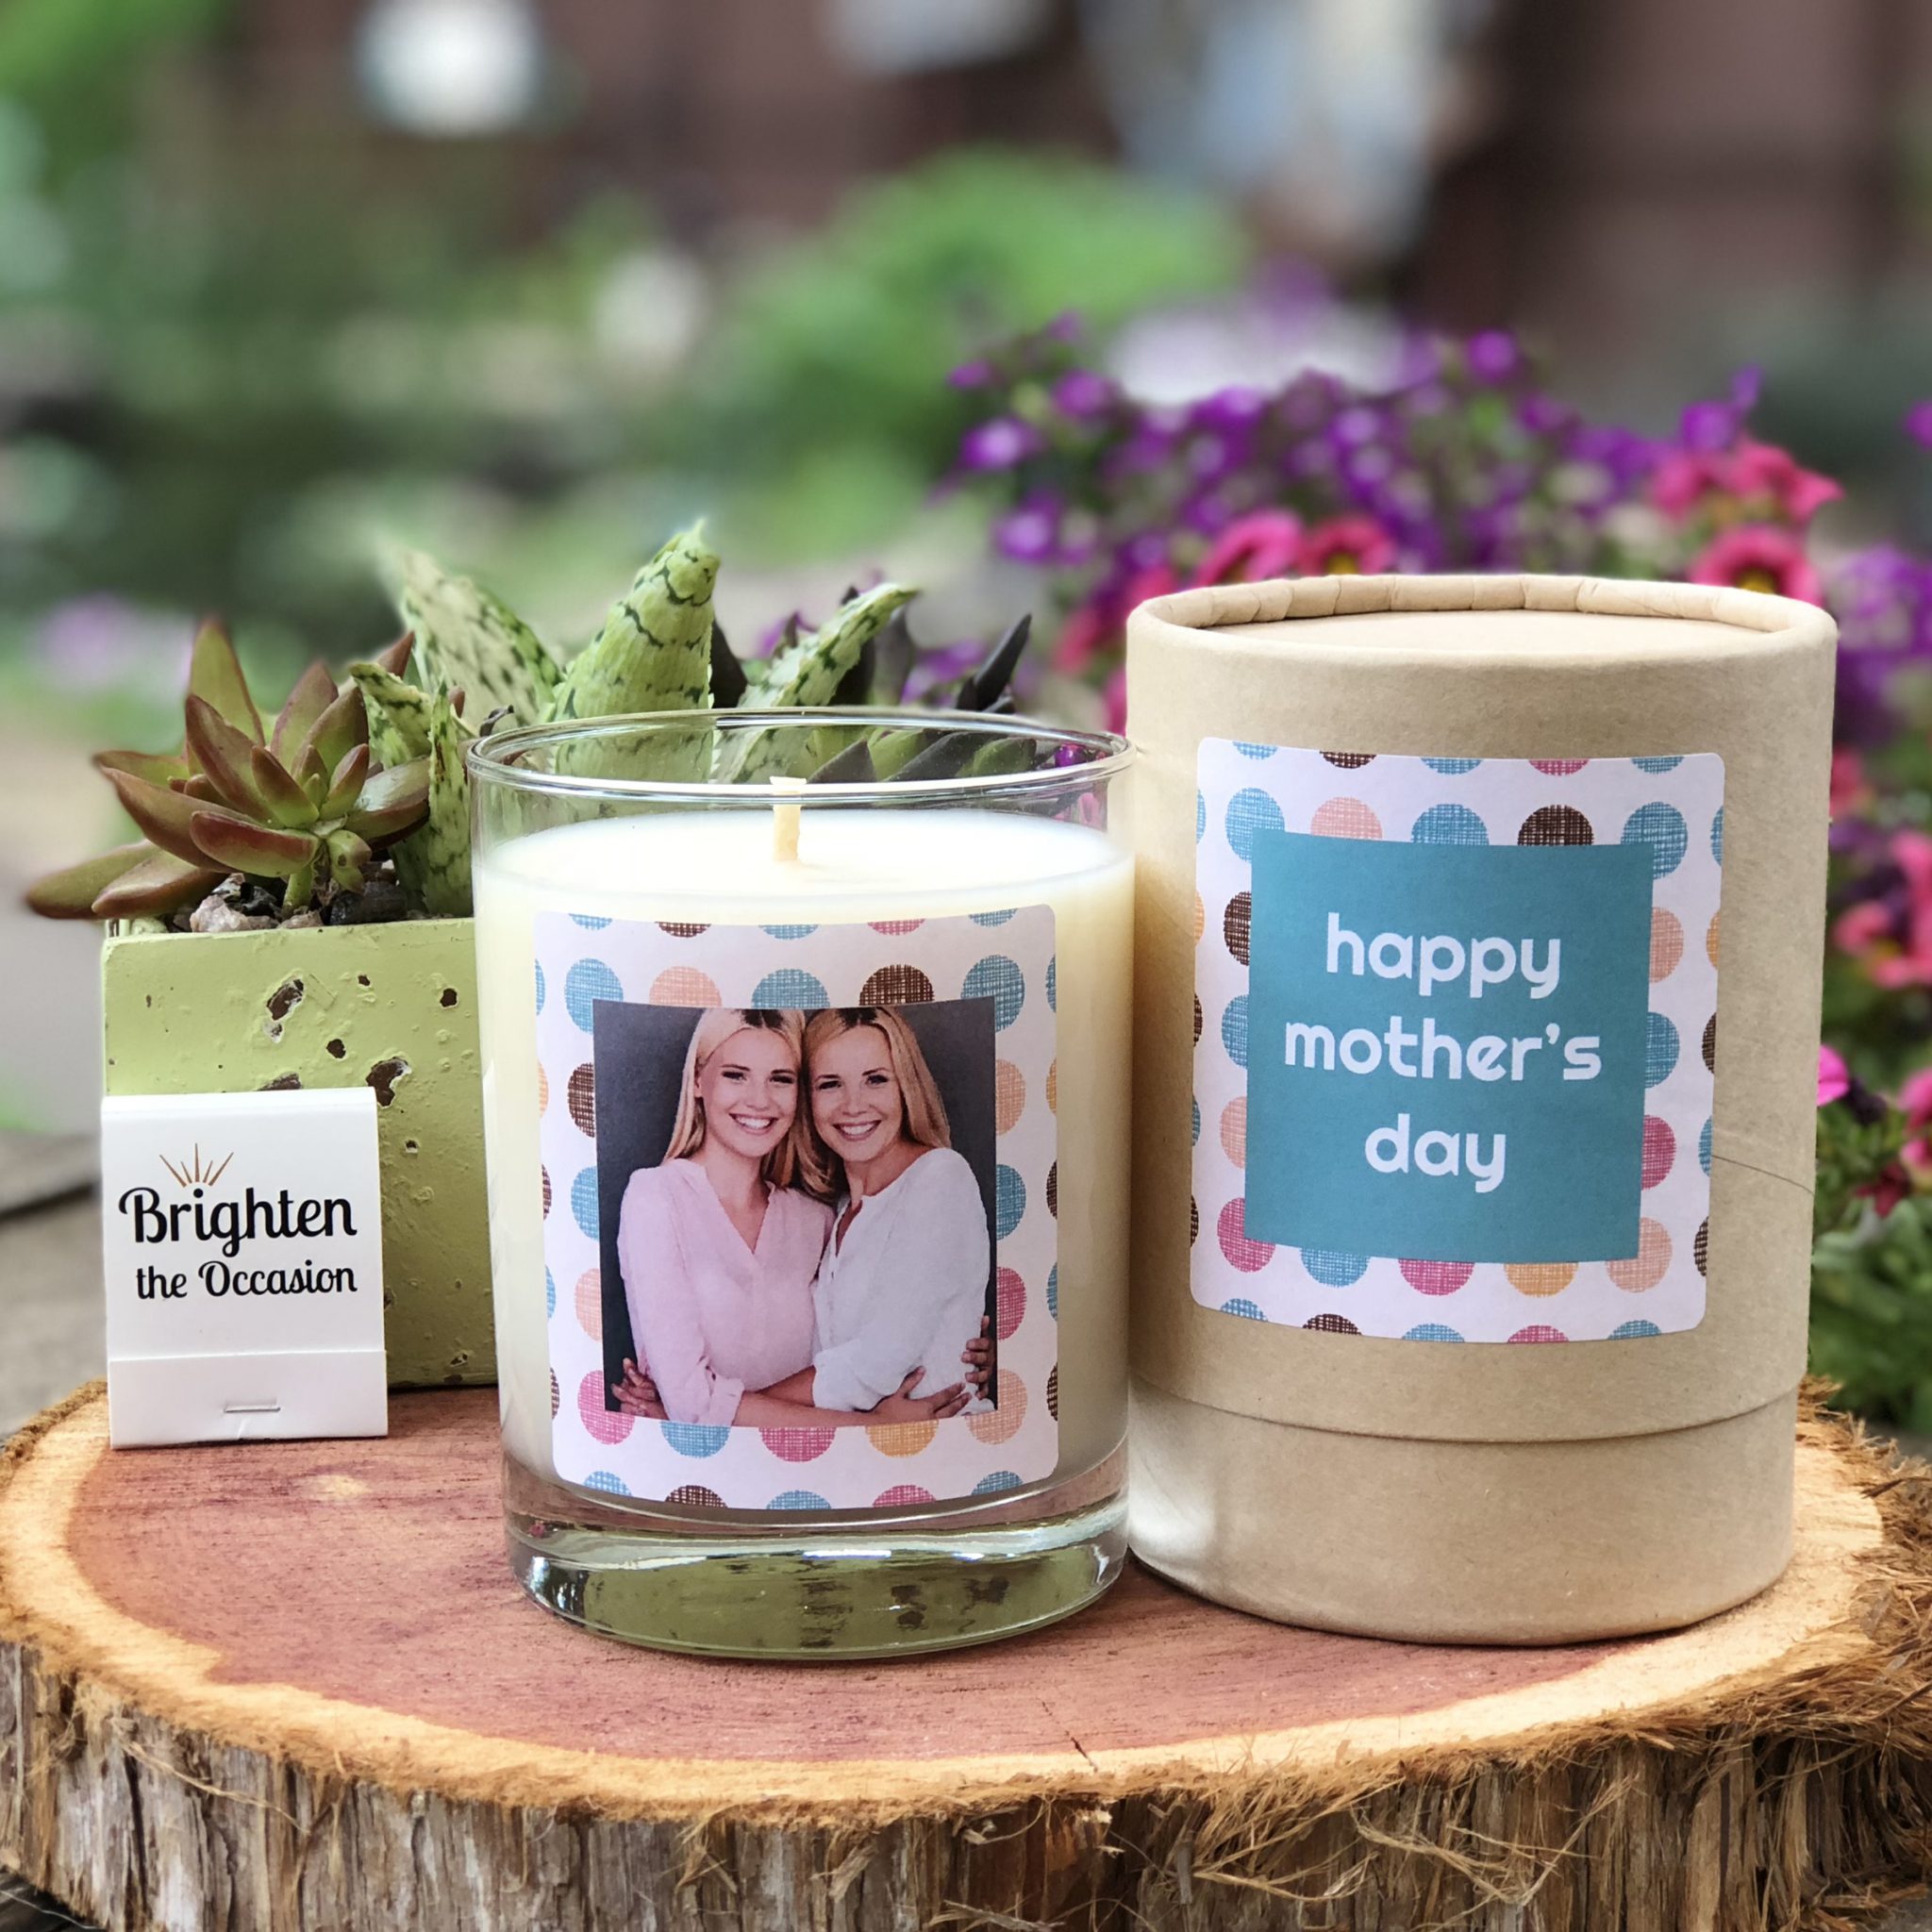 Brighten The Occasion's mother's day candles. 